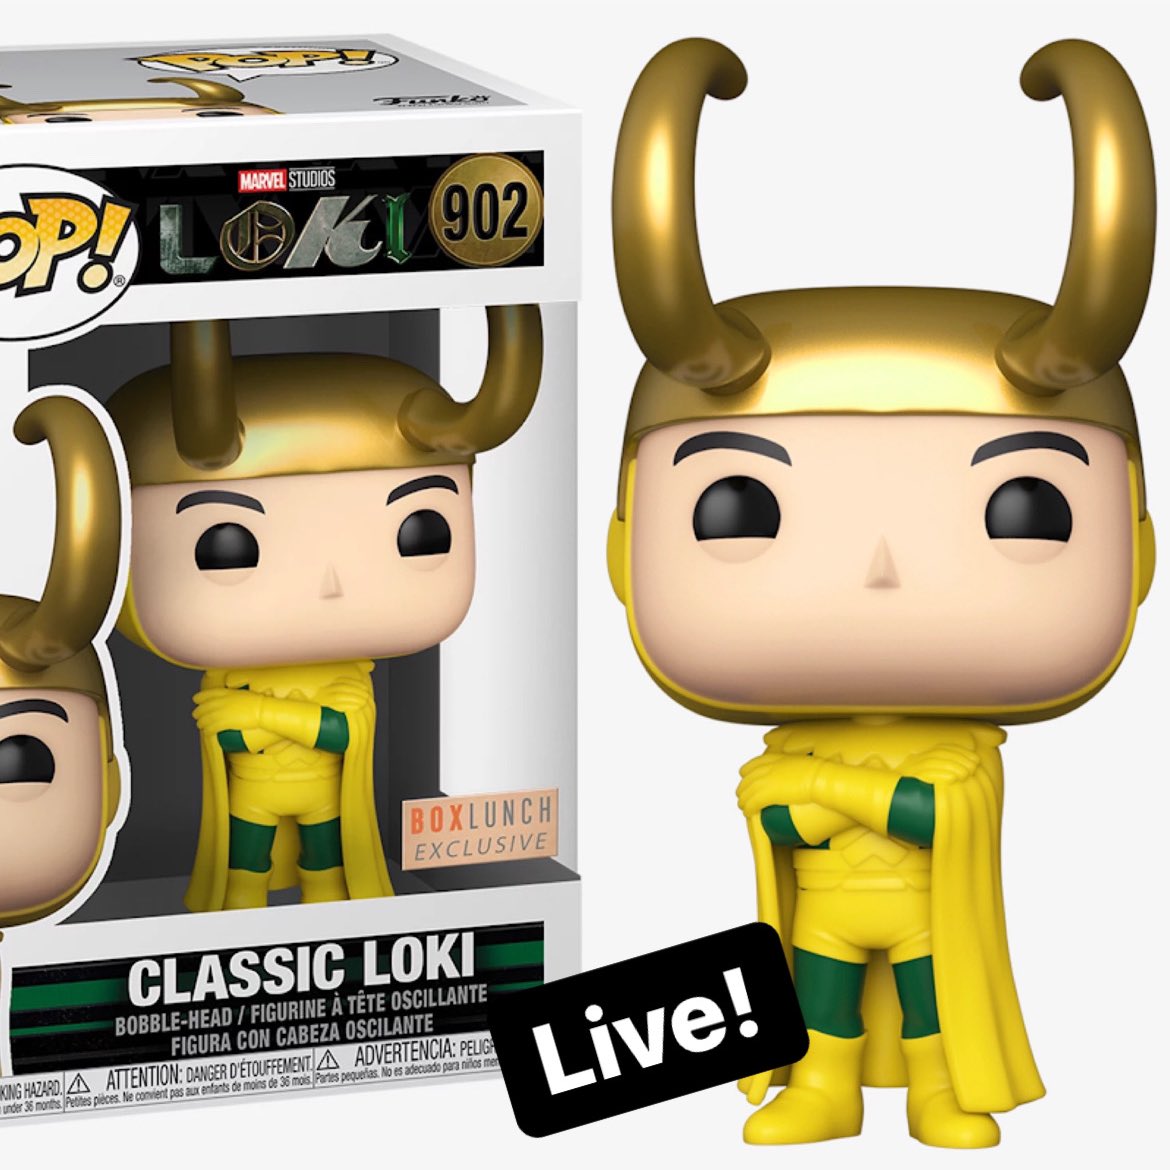 Live Now. The Box Lunch exclusive Classic Loki Funko POP! Get yours at the link below ~
Linky ~ fnkpp.com/BLLoki
#Ad #FPN #FunkoPOPNews #Funko #POP #Funkos #POPVinyl #FunkoPOP #FunkoPOPs #ClassicLoki #Loki